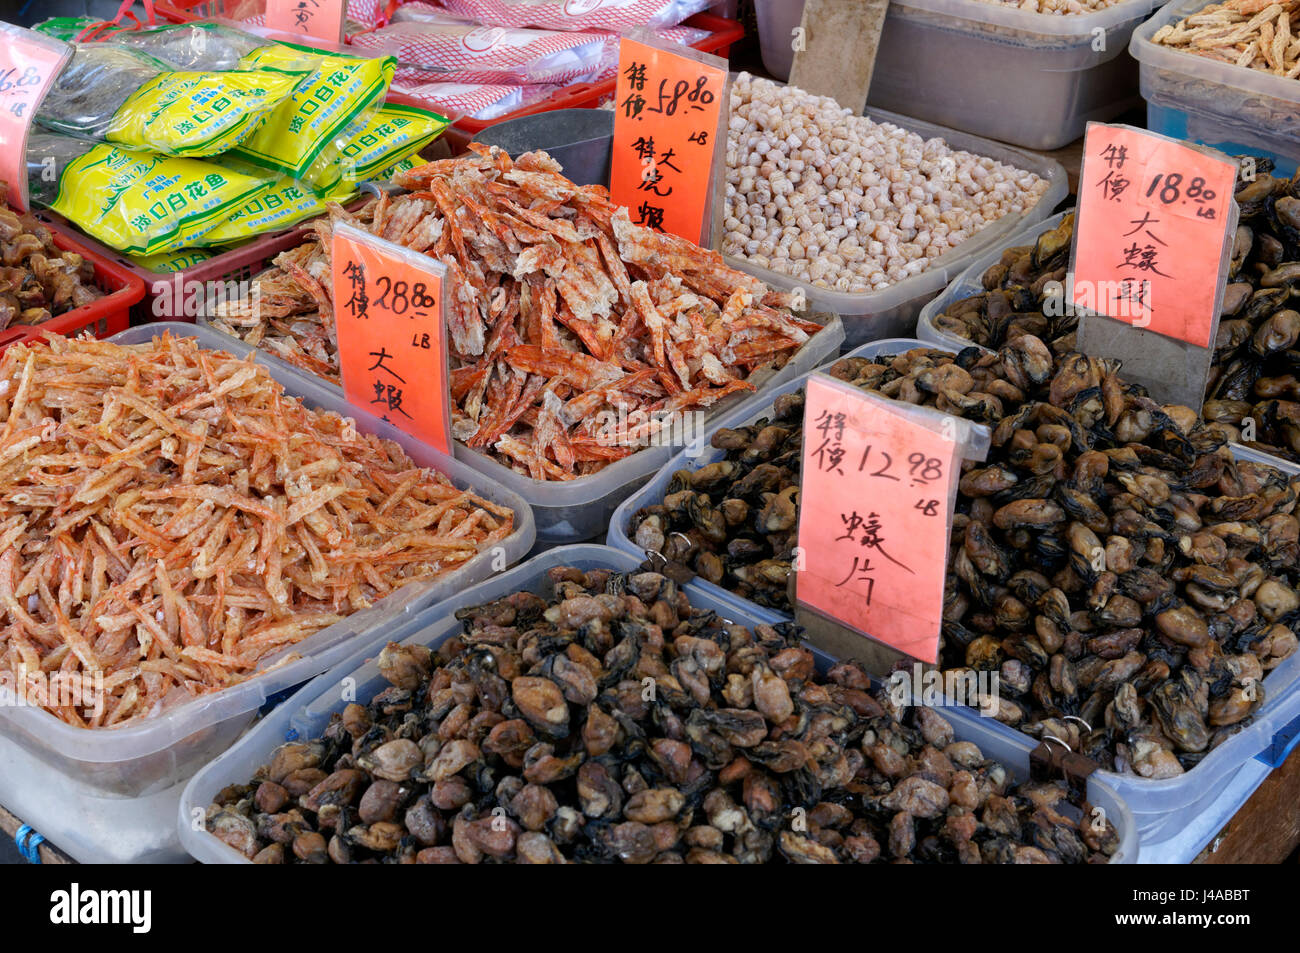 Bins and jars of traditional Chinese dried food and herbs in a shop in Chinatown, Vancouver, British Columbia, Canada Stock Photo